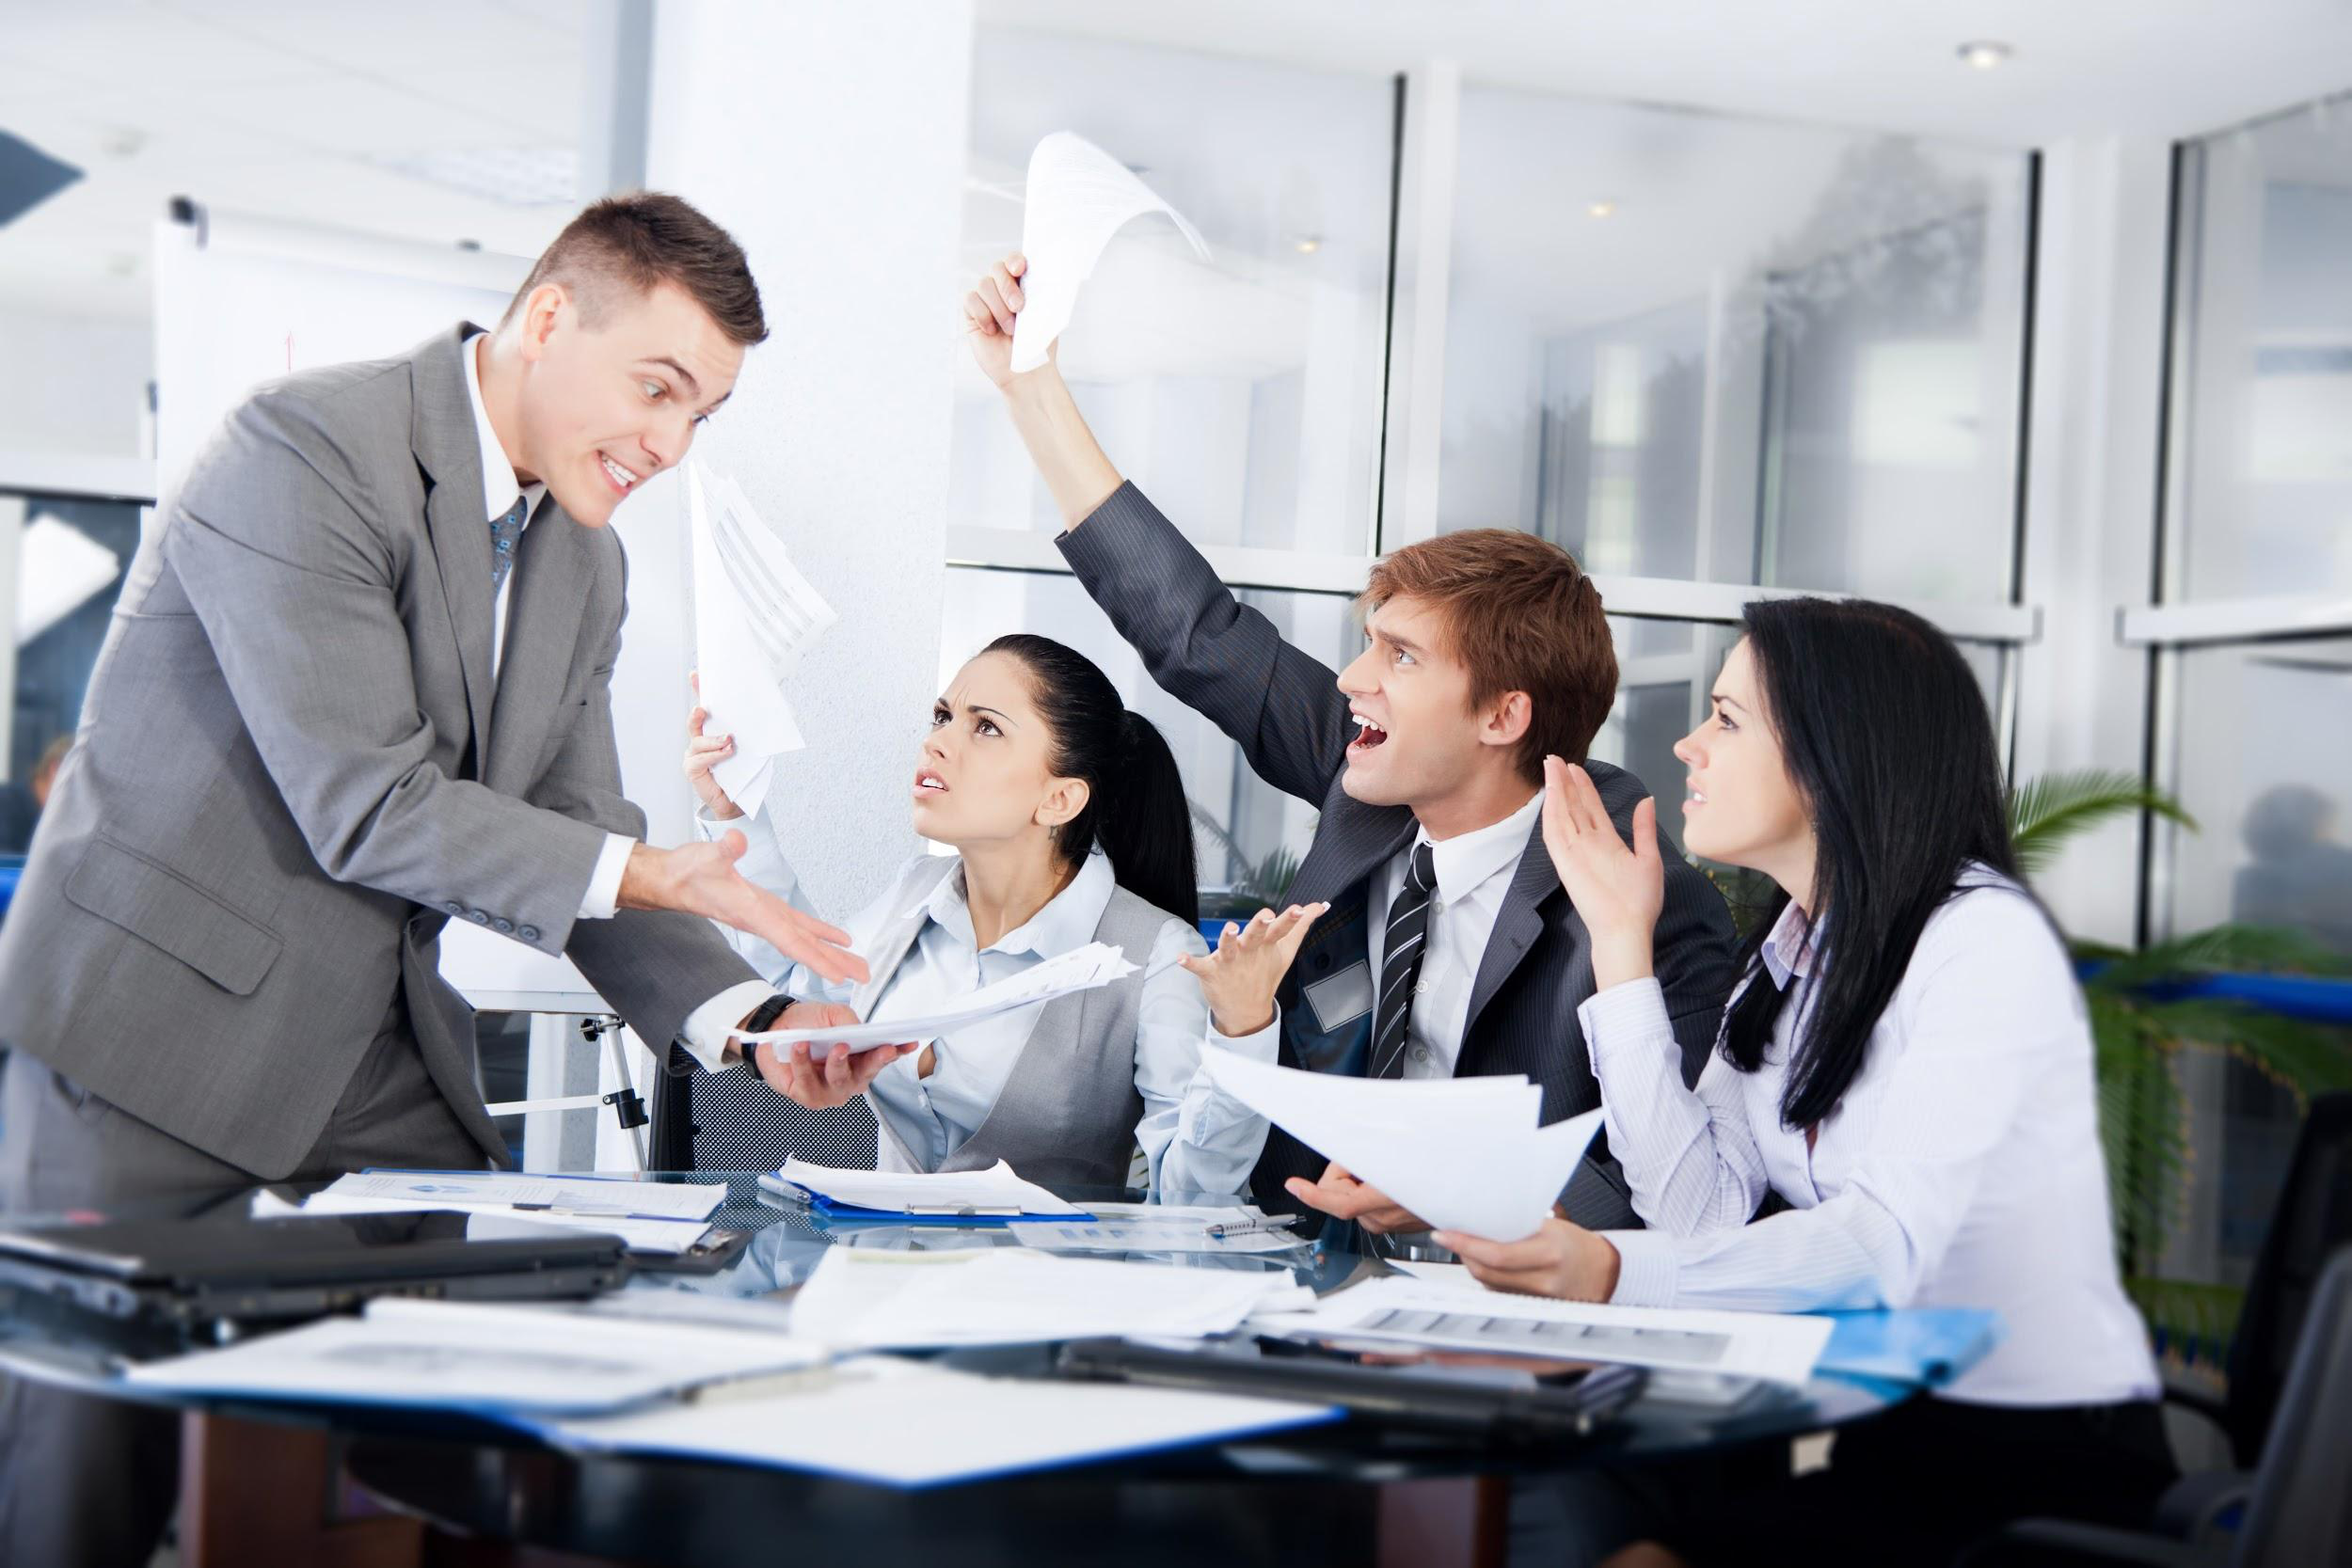 How Organizations Can Avoid & Reduce Workplace Conflicts